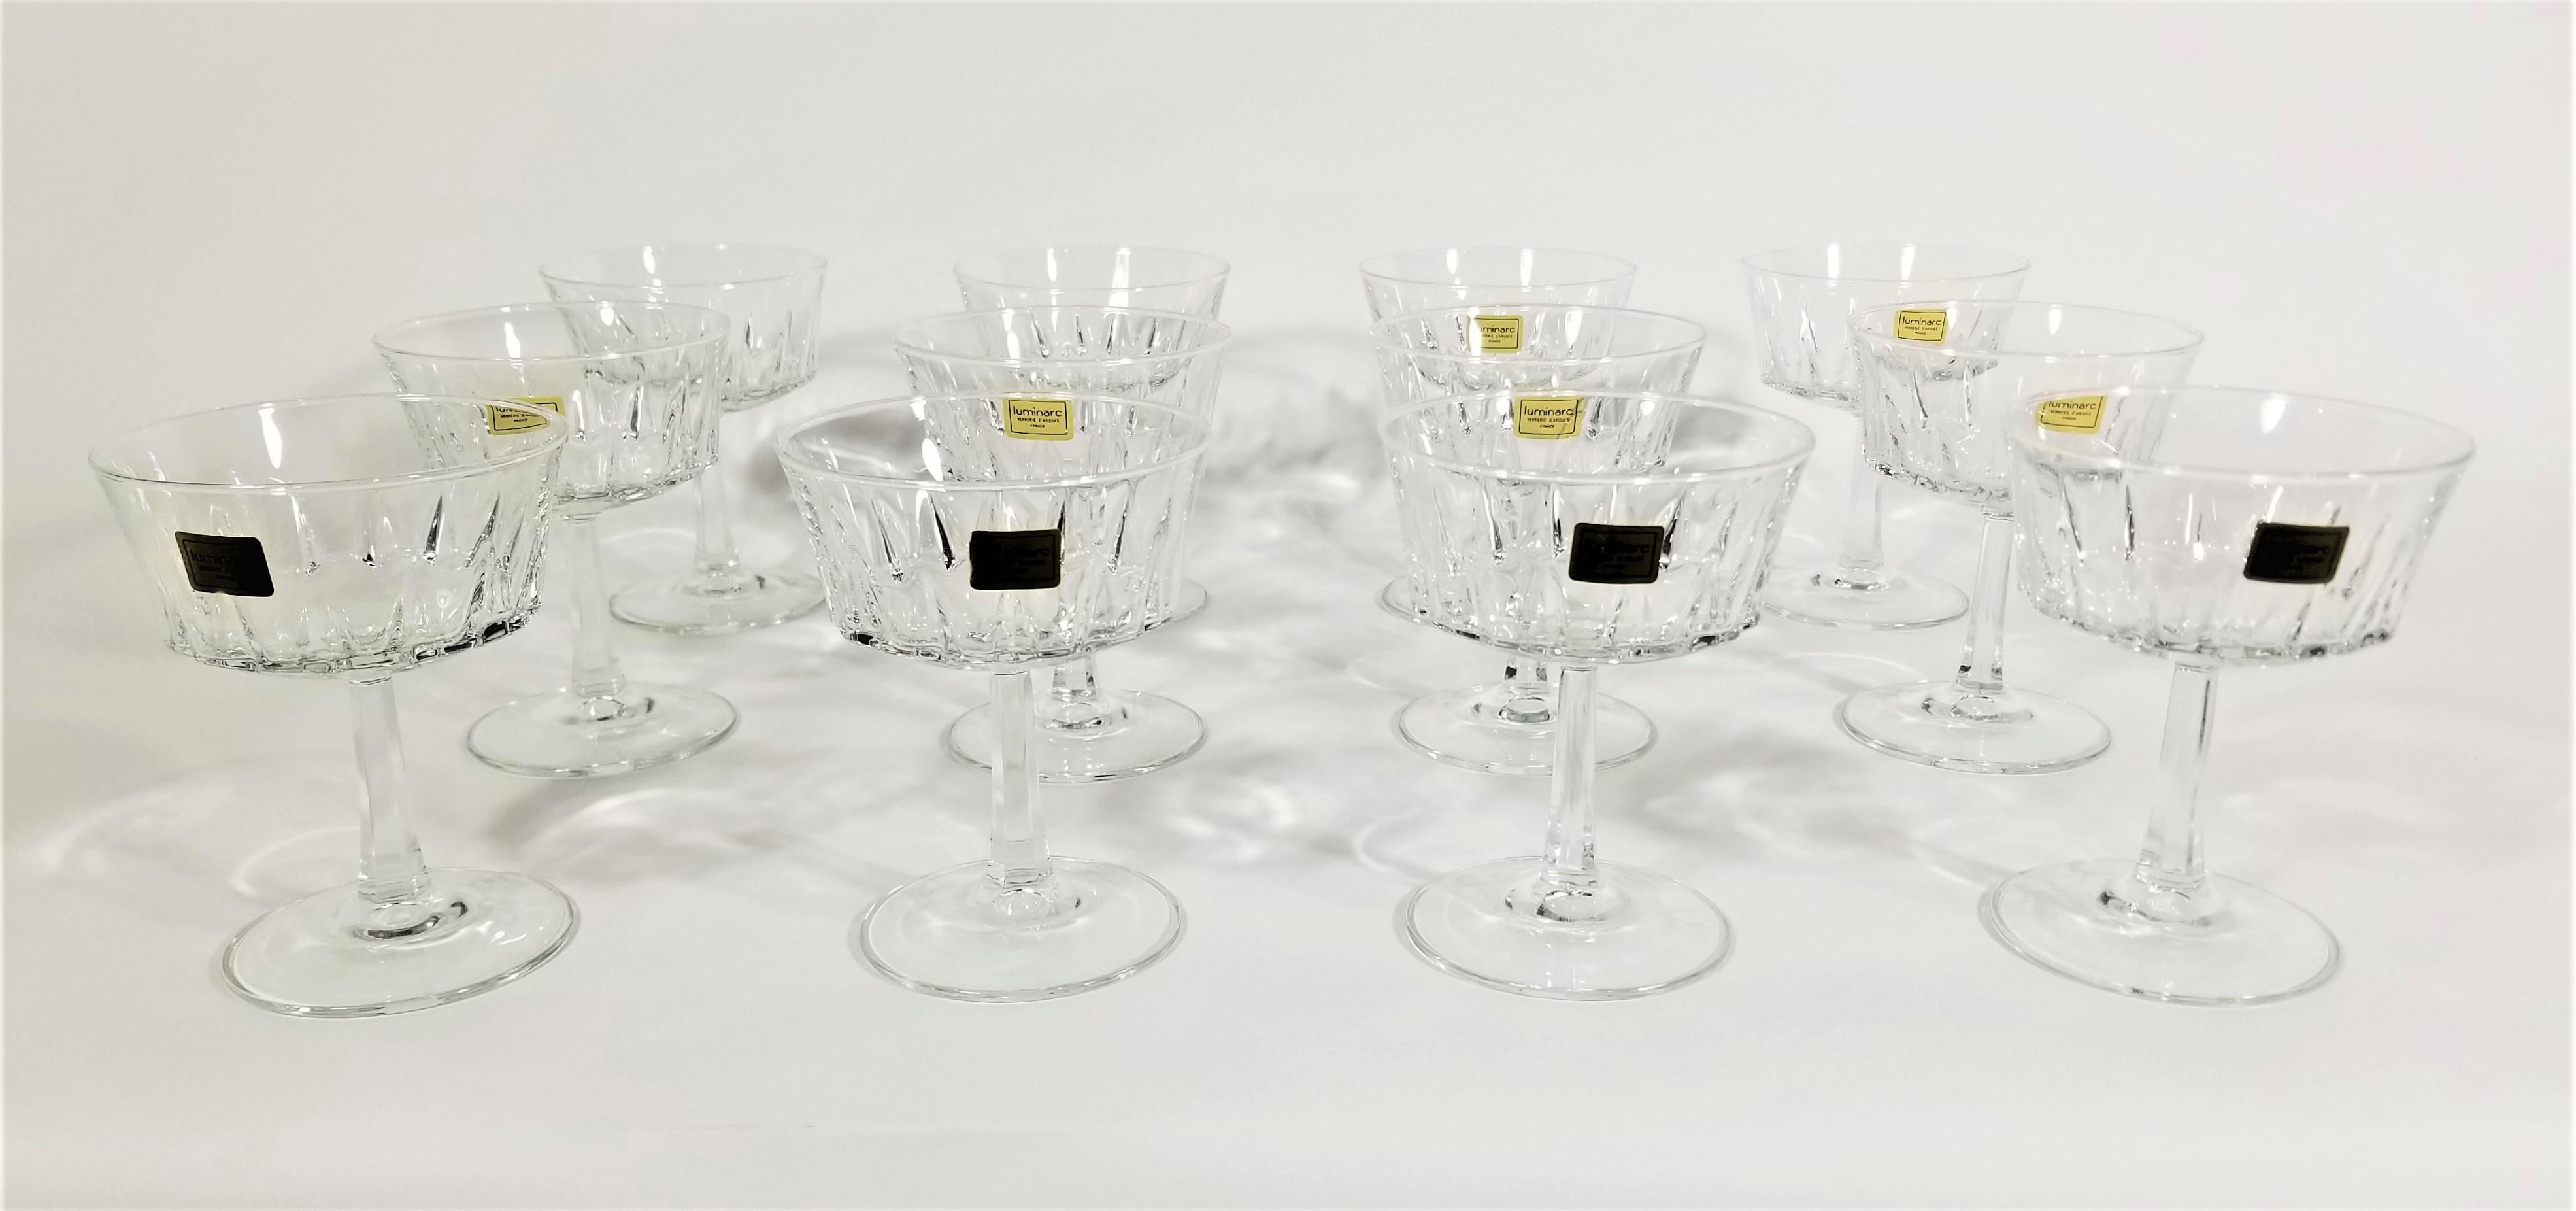 Luminarc champagne or cocktail coupes stemmed glassware barware. Mid century. All glasses marked France and most still retain original Luminarc marking sticker. Excellent Unused Condition. 



